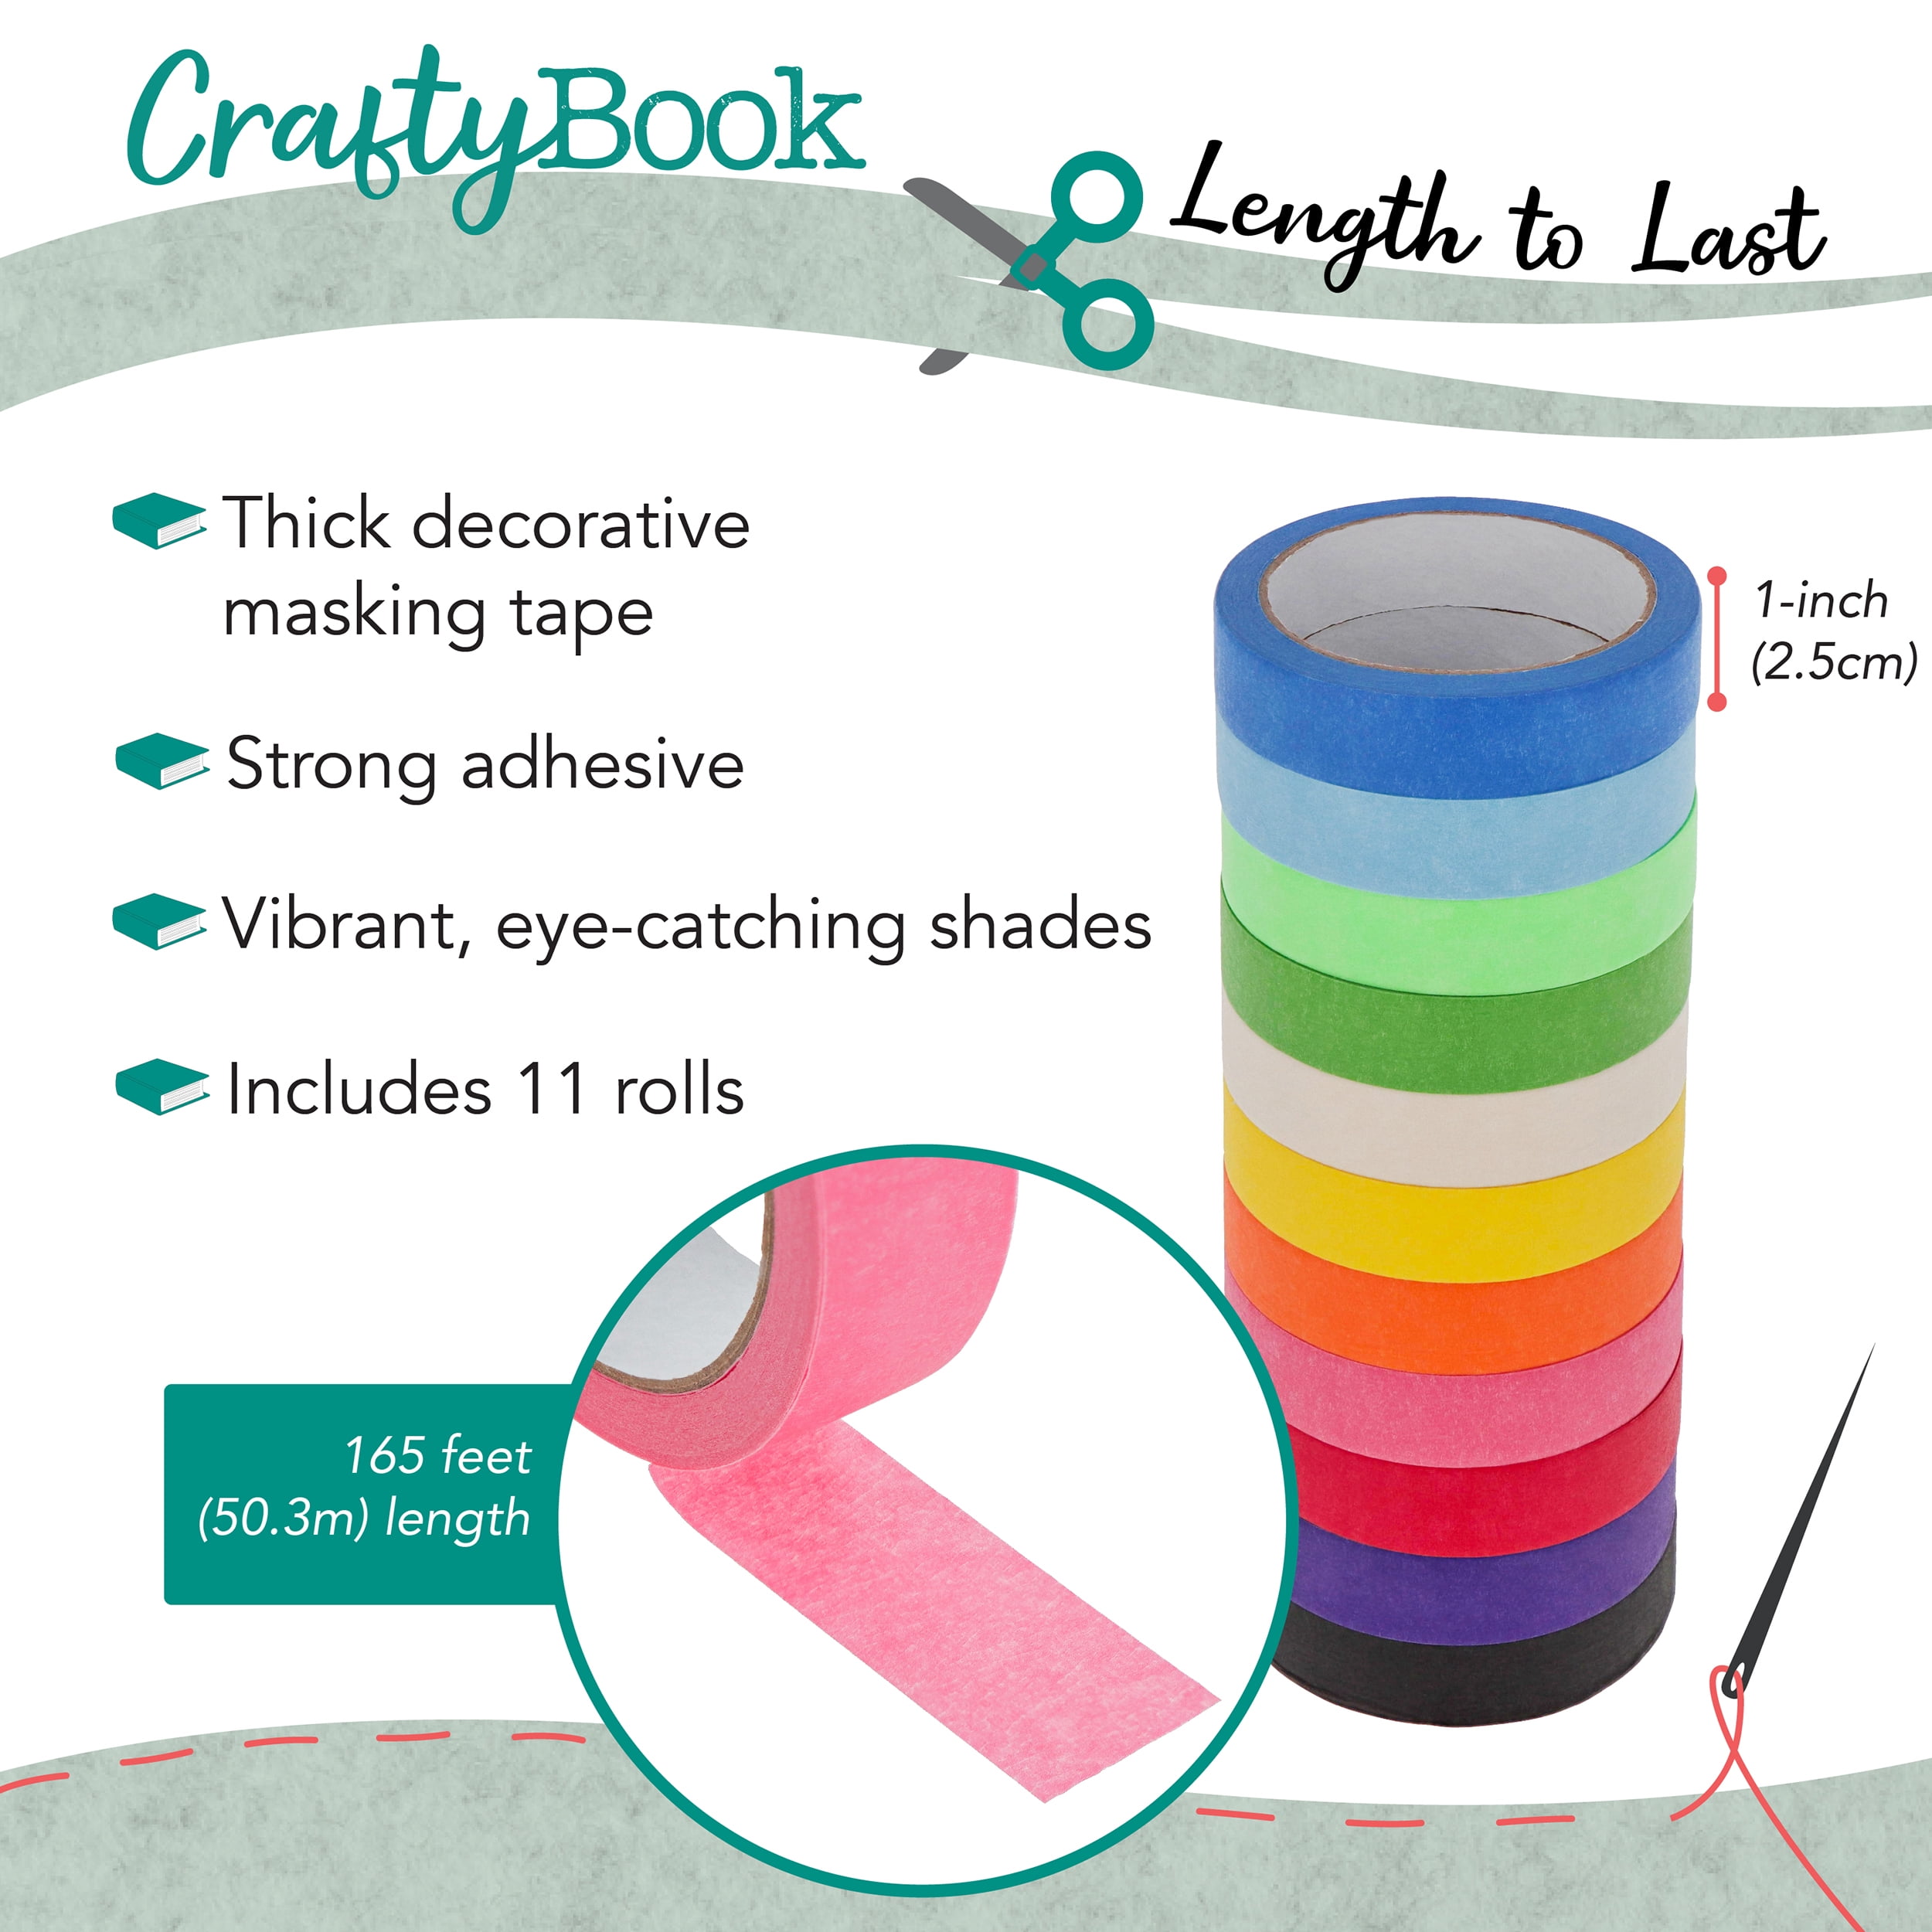 CraftyBook Colored Masking Tape 1in x 165ft Rolls - 11pc Painters